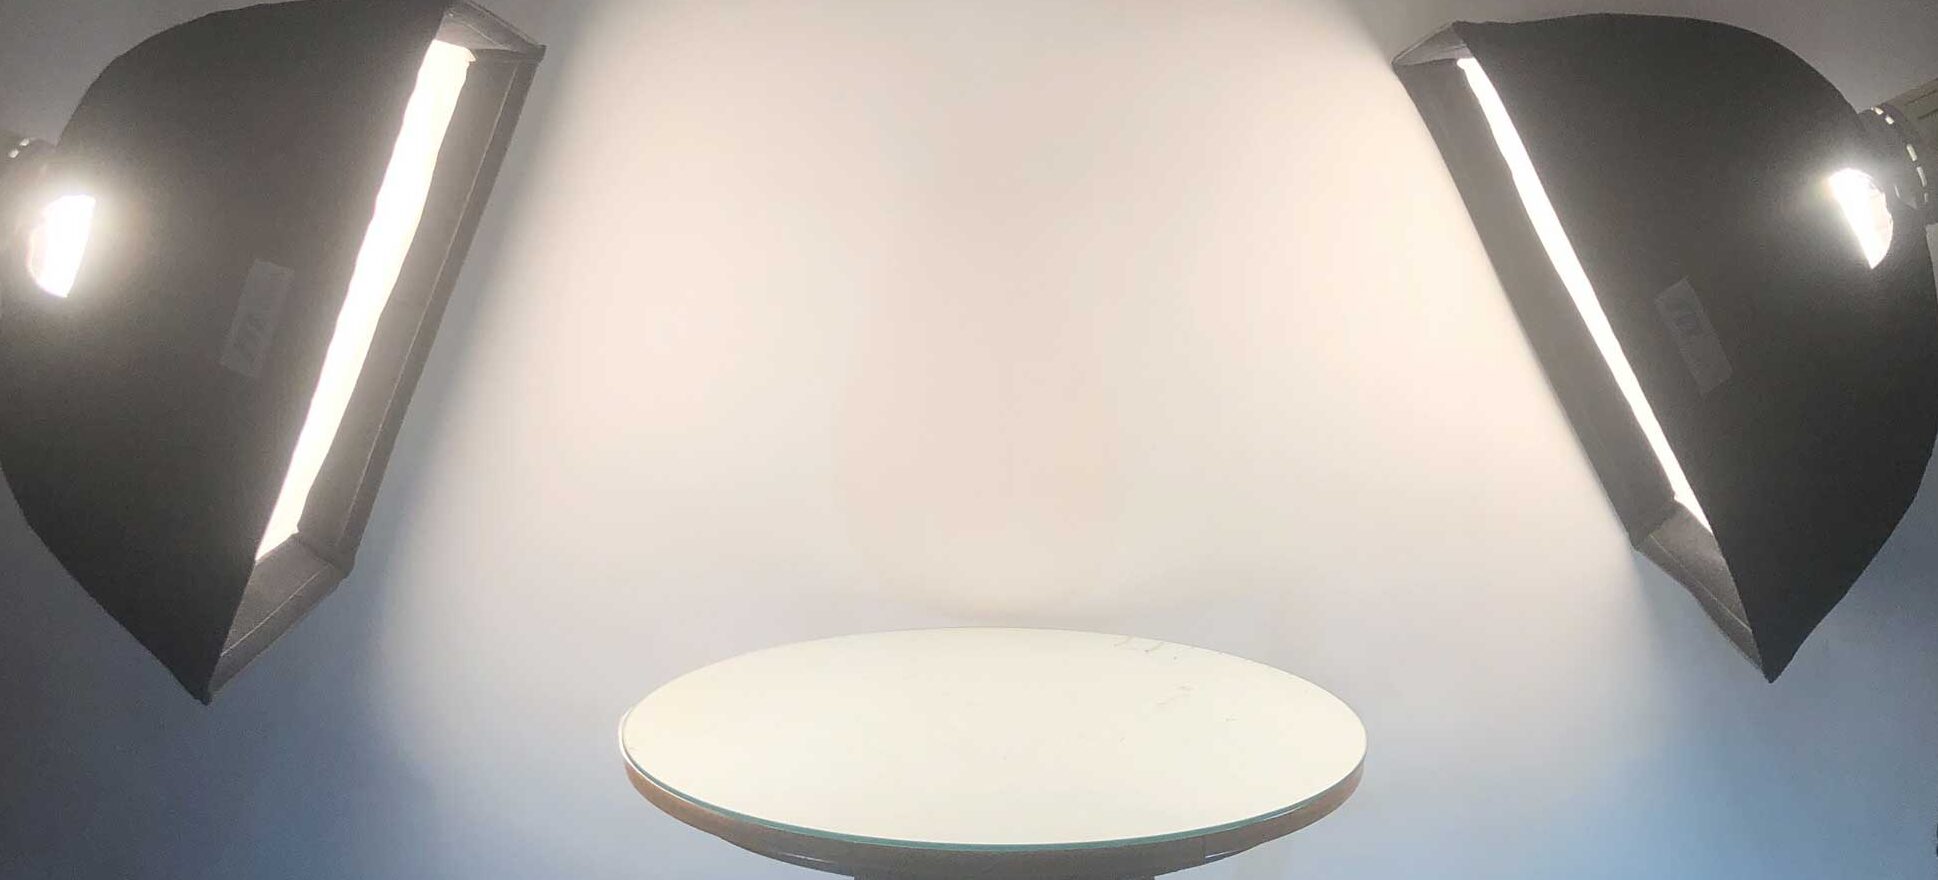 Two photography lights shining on an elevated table.